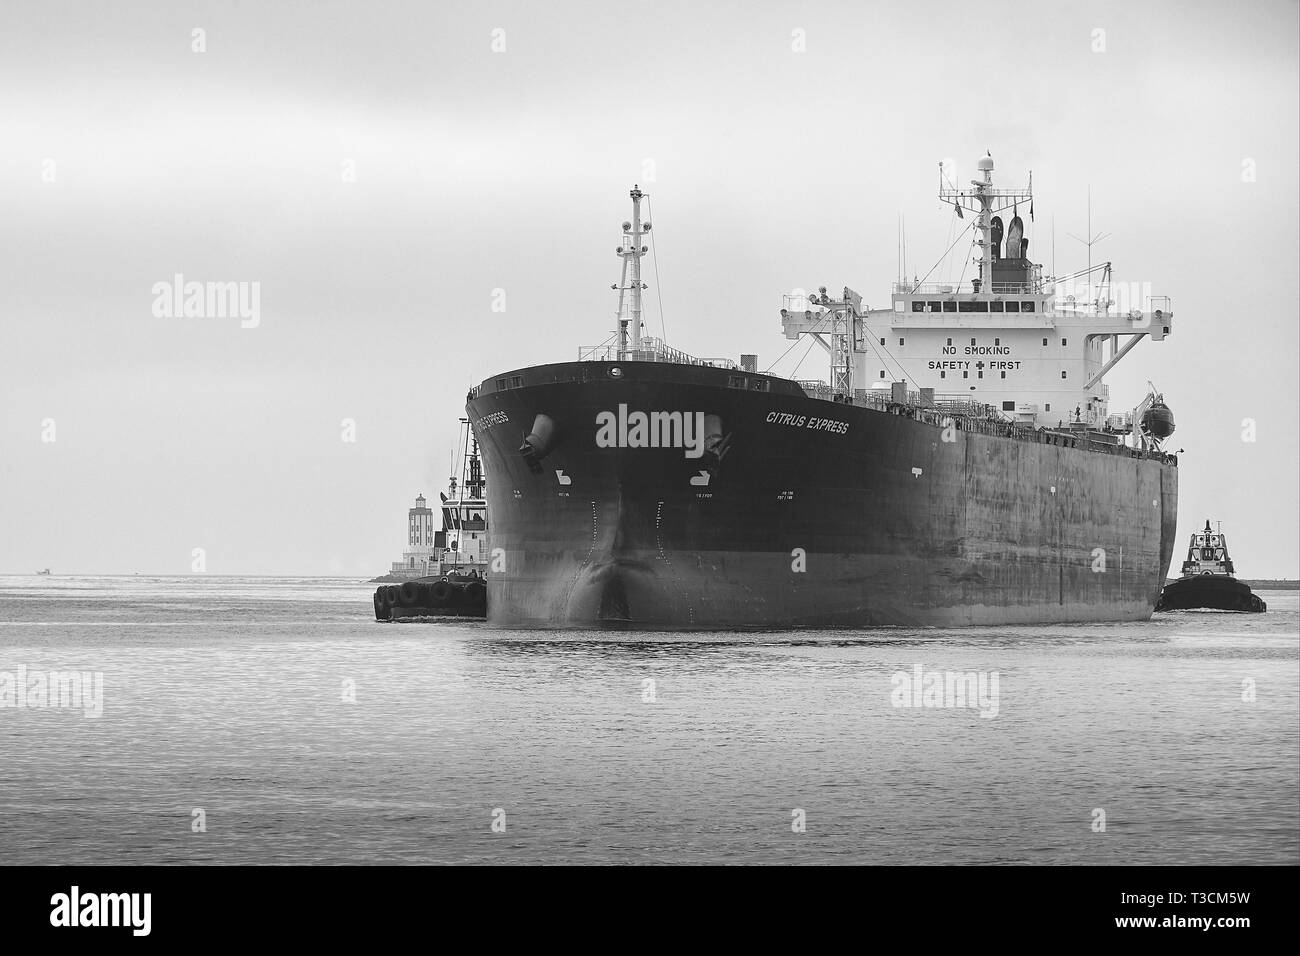 Black & White Photo Of The Oil Products Tanker, CITRUS EXPRESS, Entering The Los Angeles Main Channel At The Port Of Los Angeles, California, USA. Stock Photo